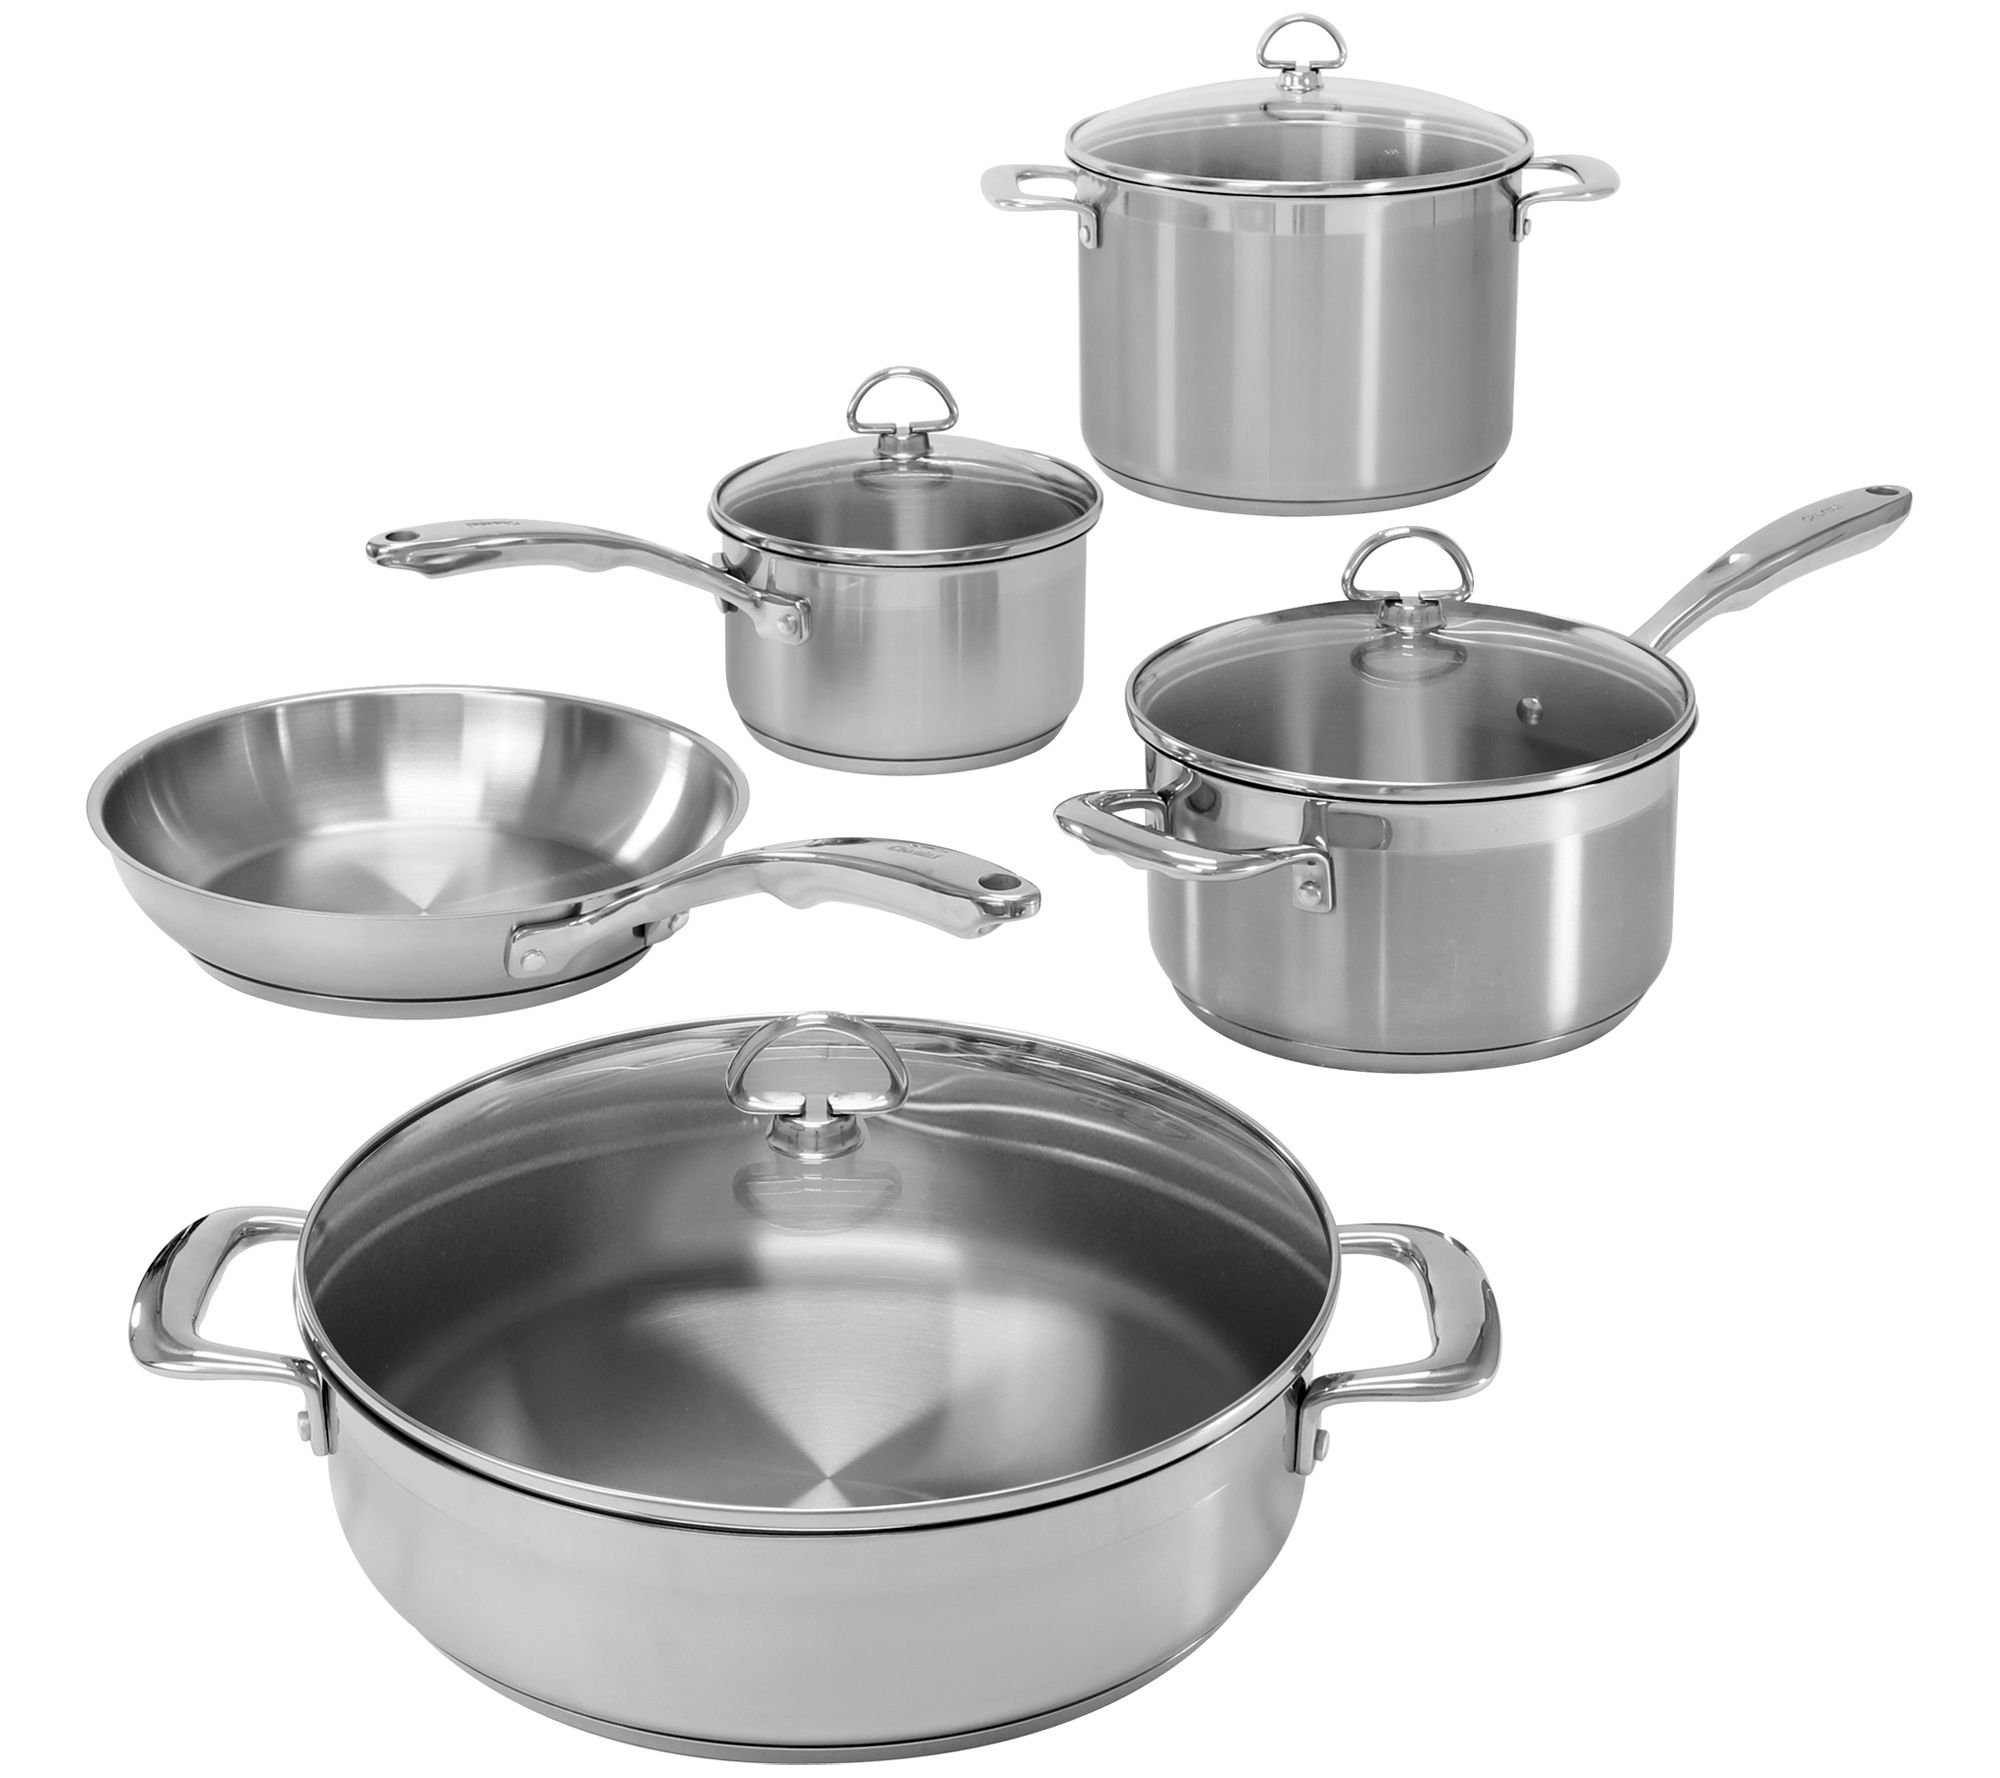 Buy Bergner Gourmet Induction Stainless Steel Cookware Set (9 Pc